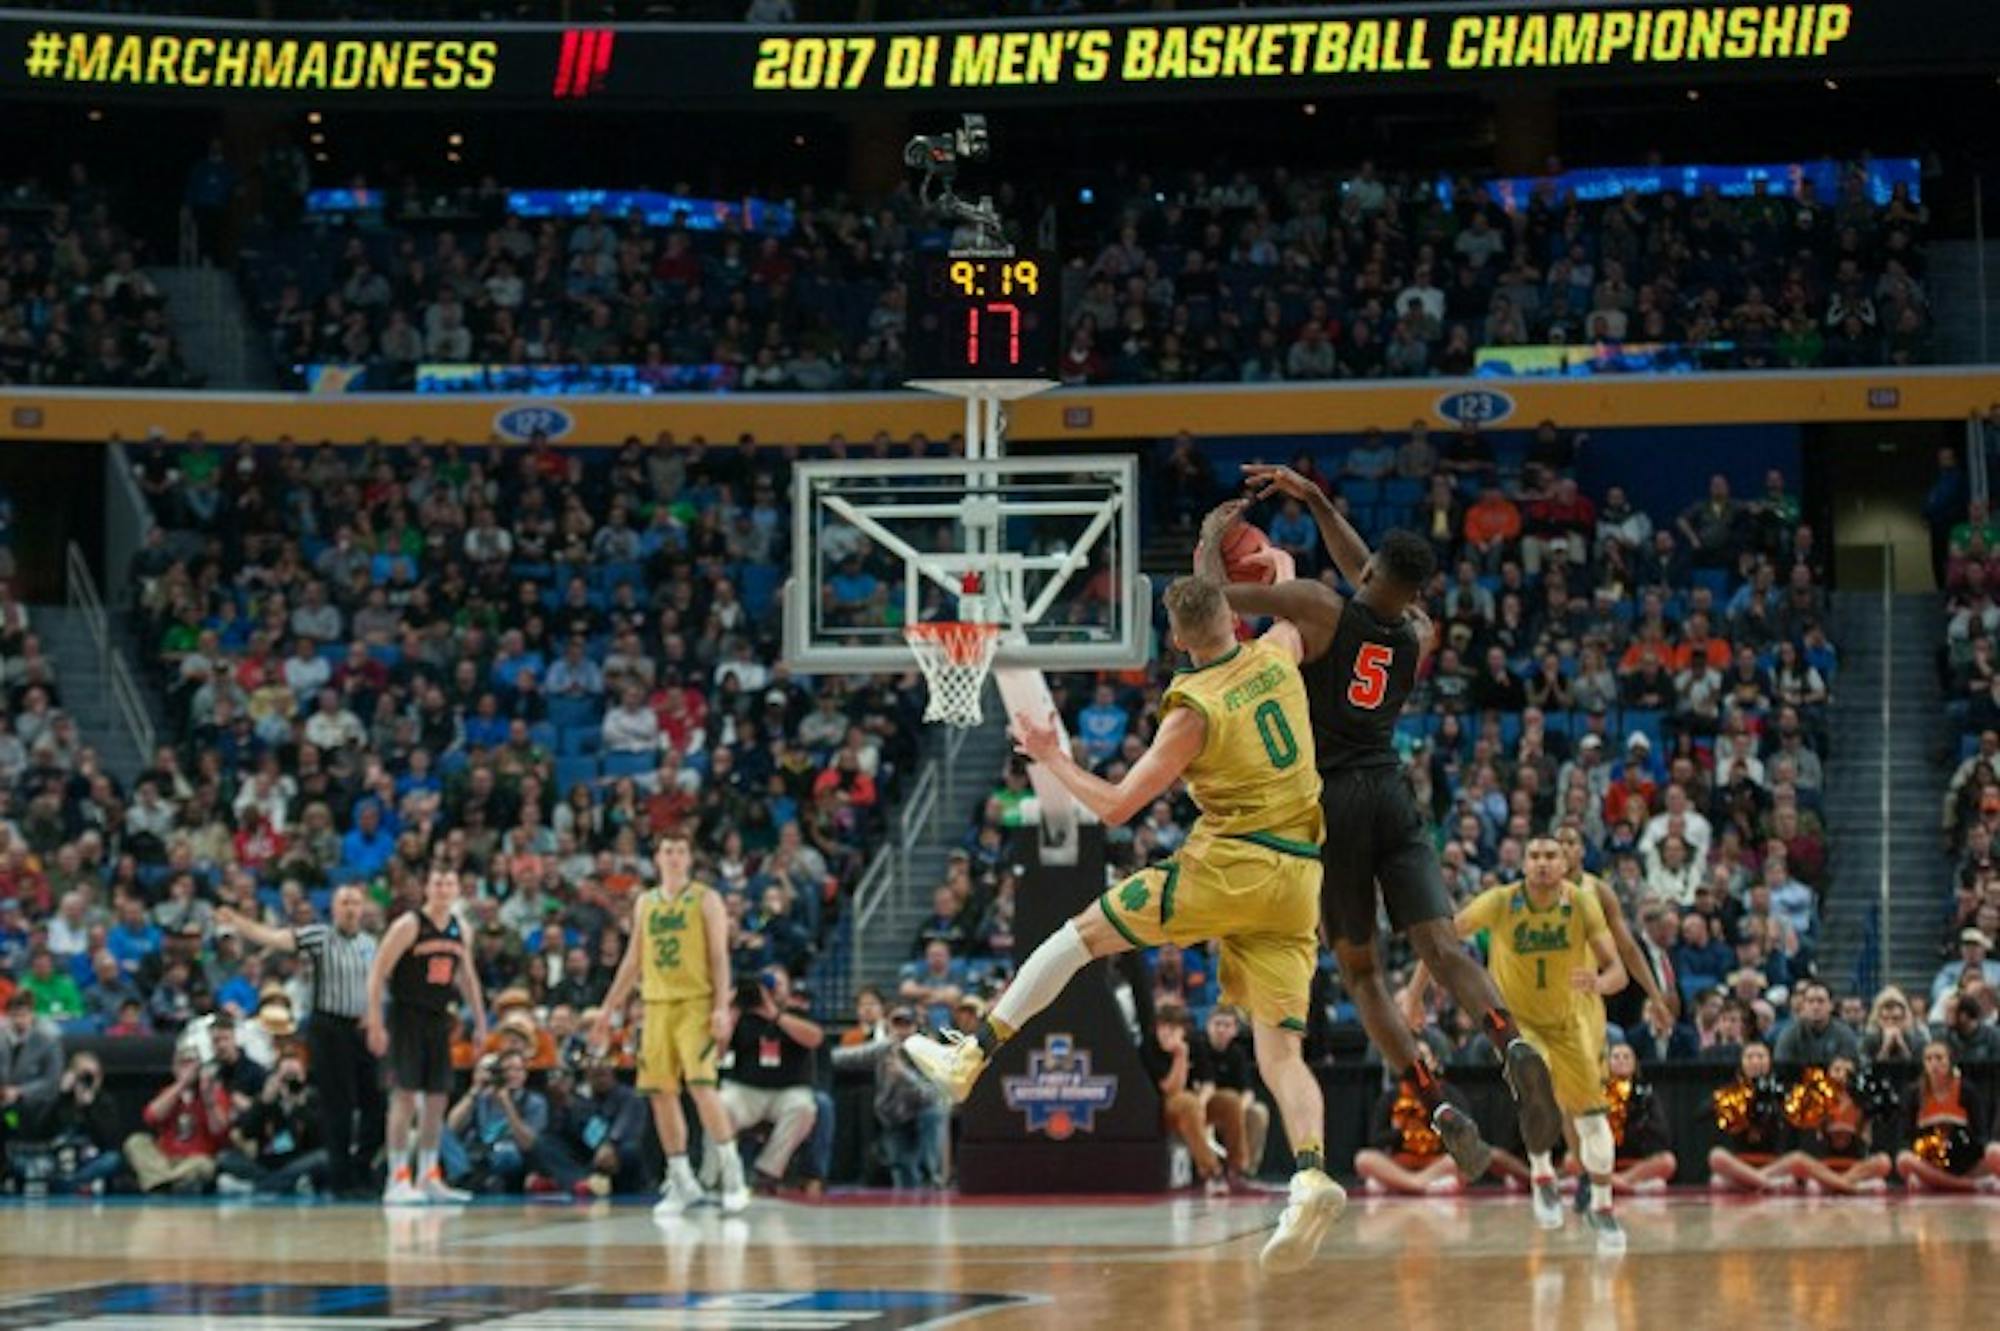 Irish sophomore guard Rex Pflueger competes for a loose ball with a Princeton player in Notre Dame's 60-58 win over the Tigers on Thursday at KeyBank Arena.